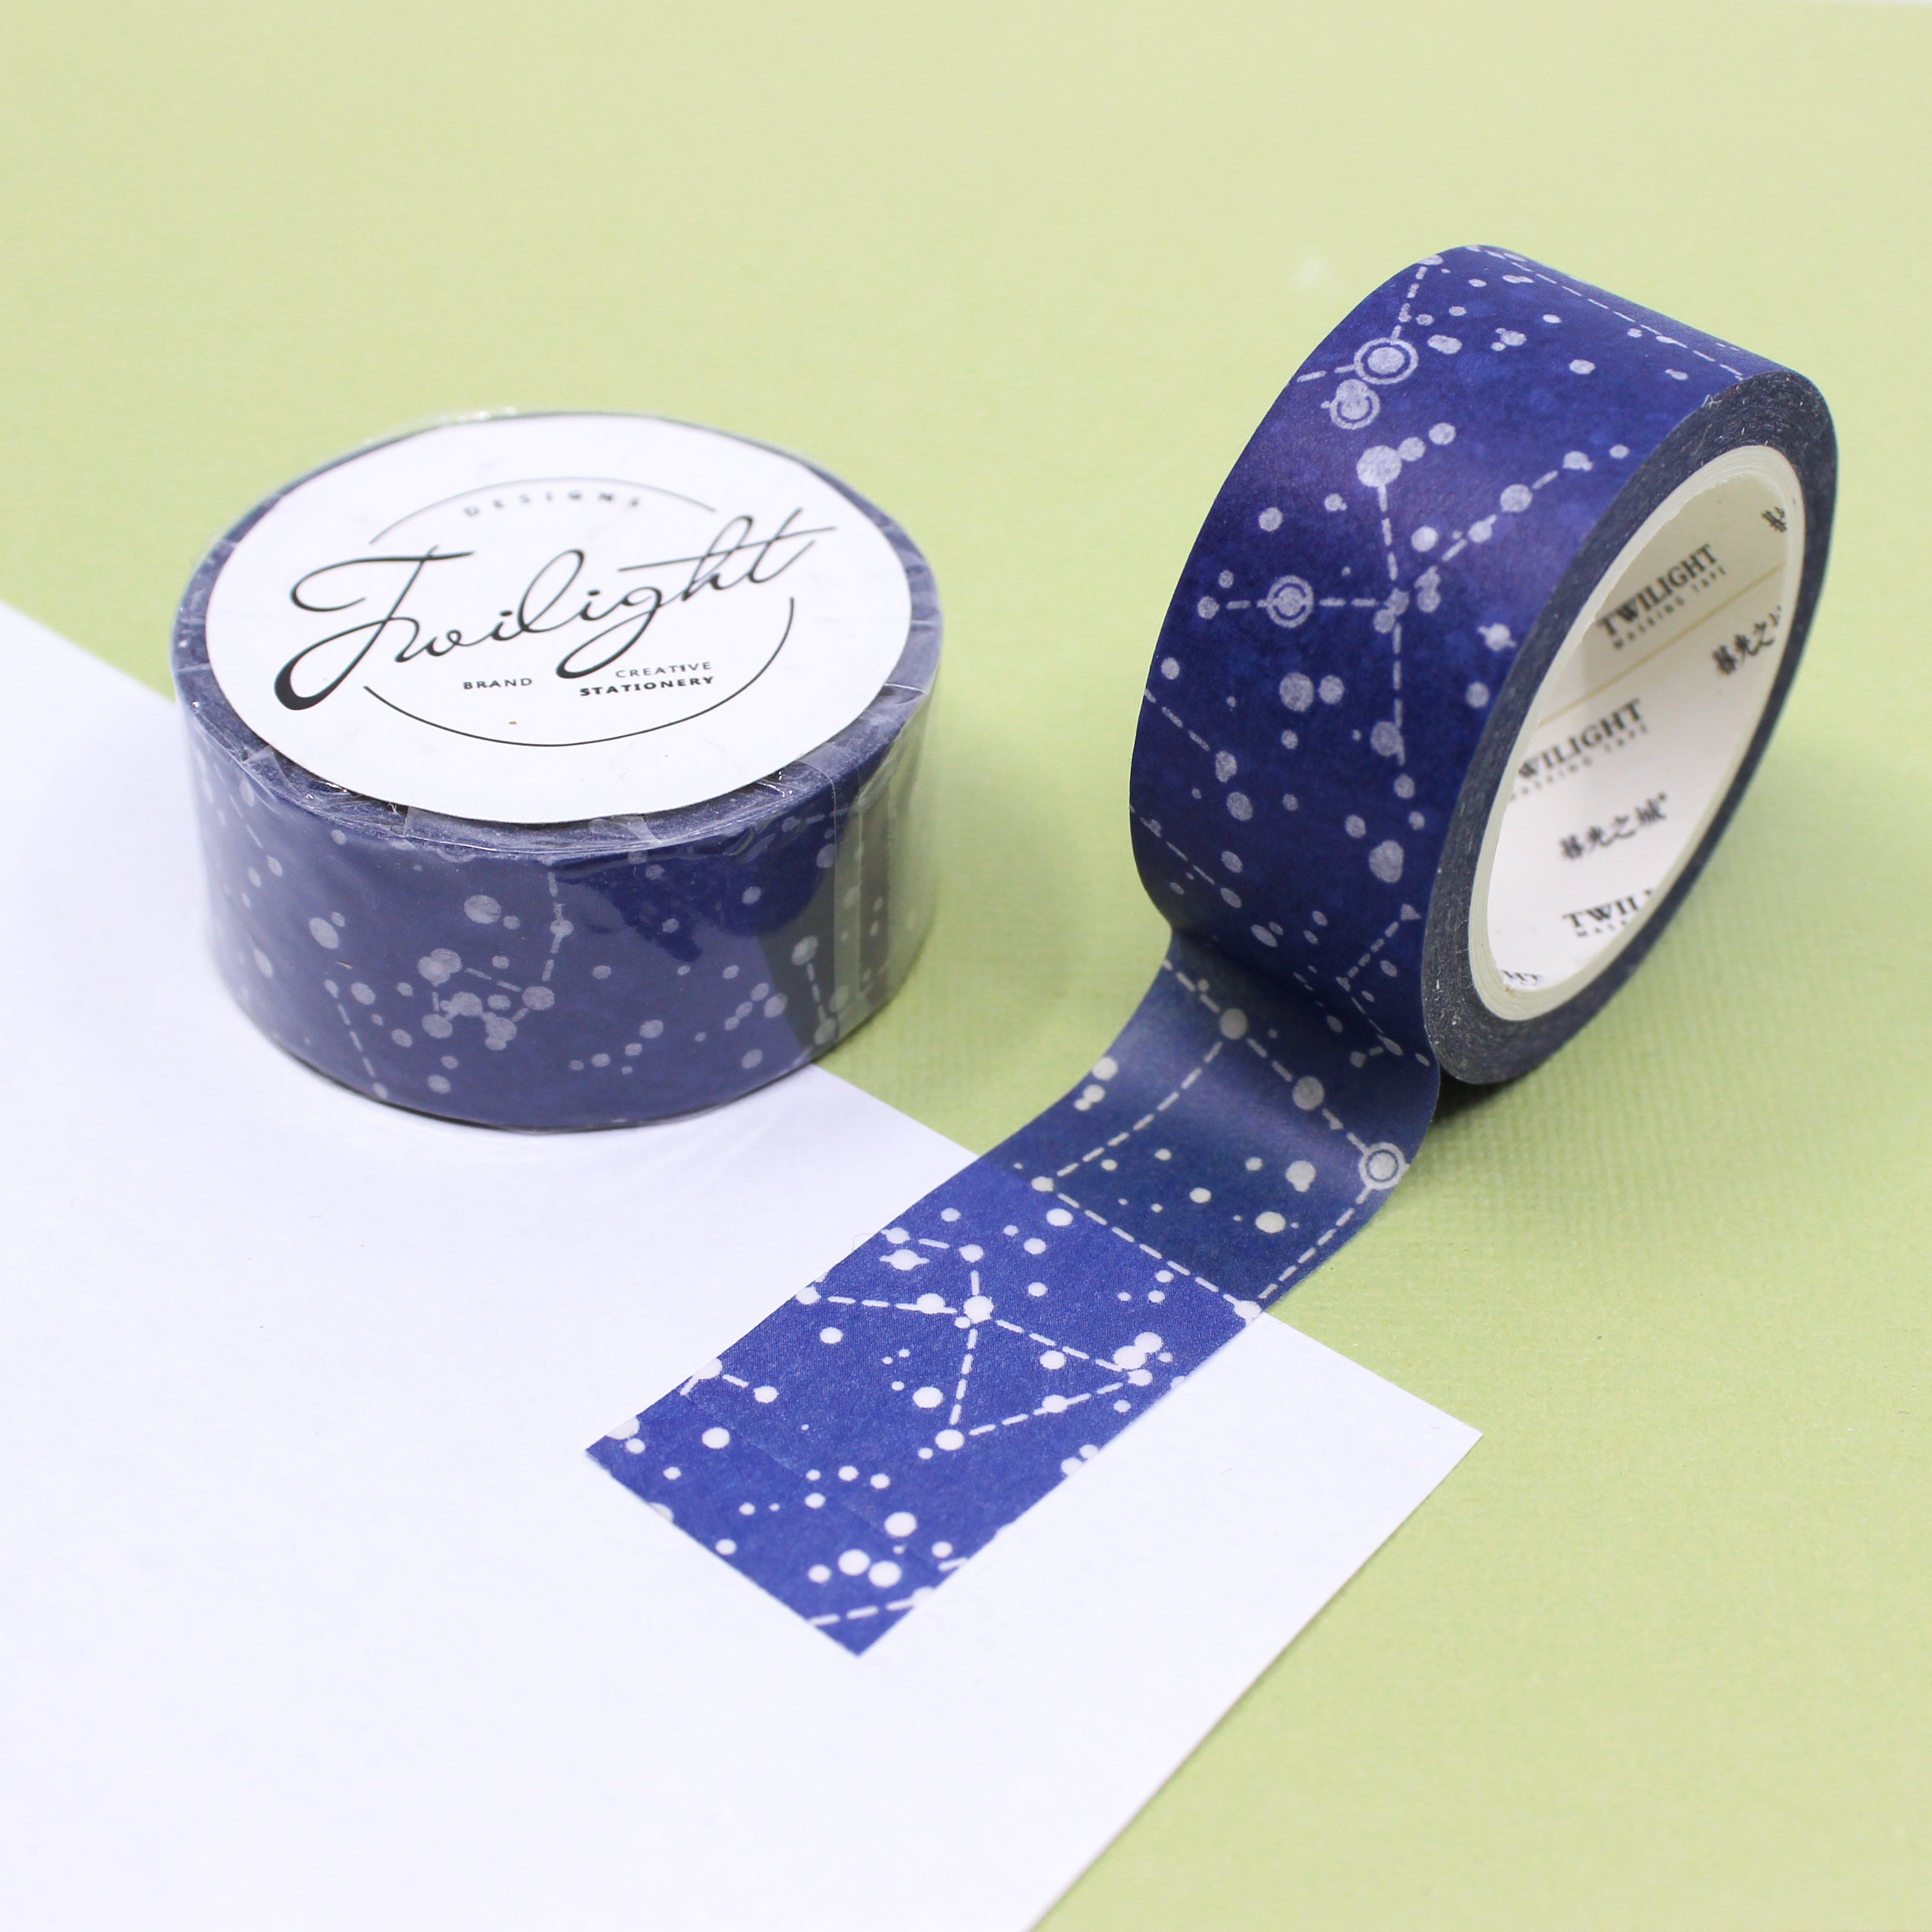 This is a blue constellation astronomy pattern washi tape from BBB Supplies Craft Shop